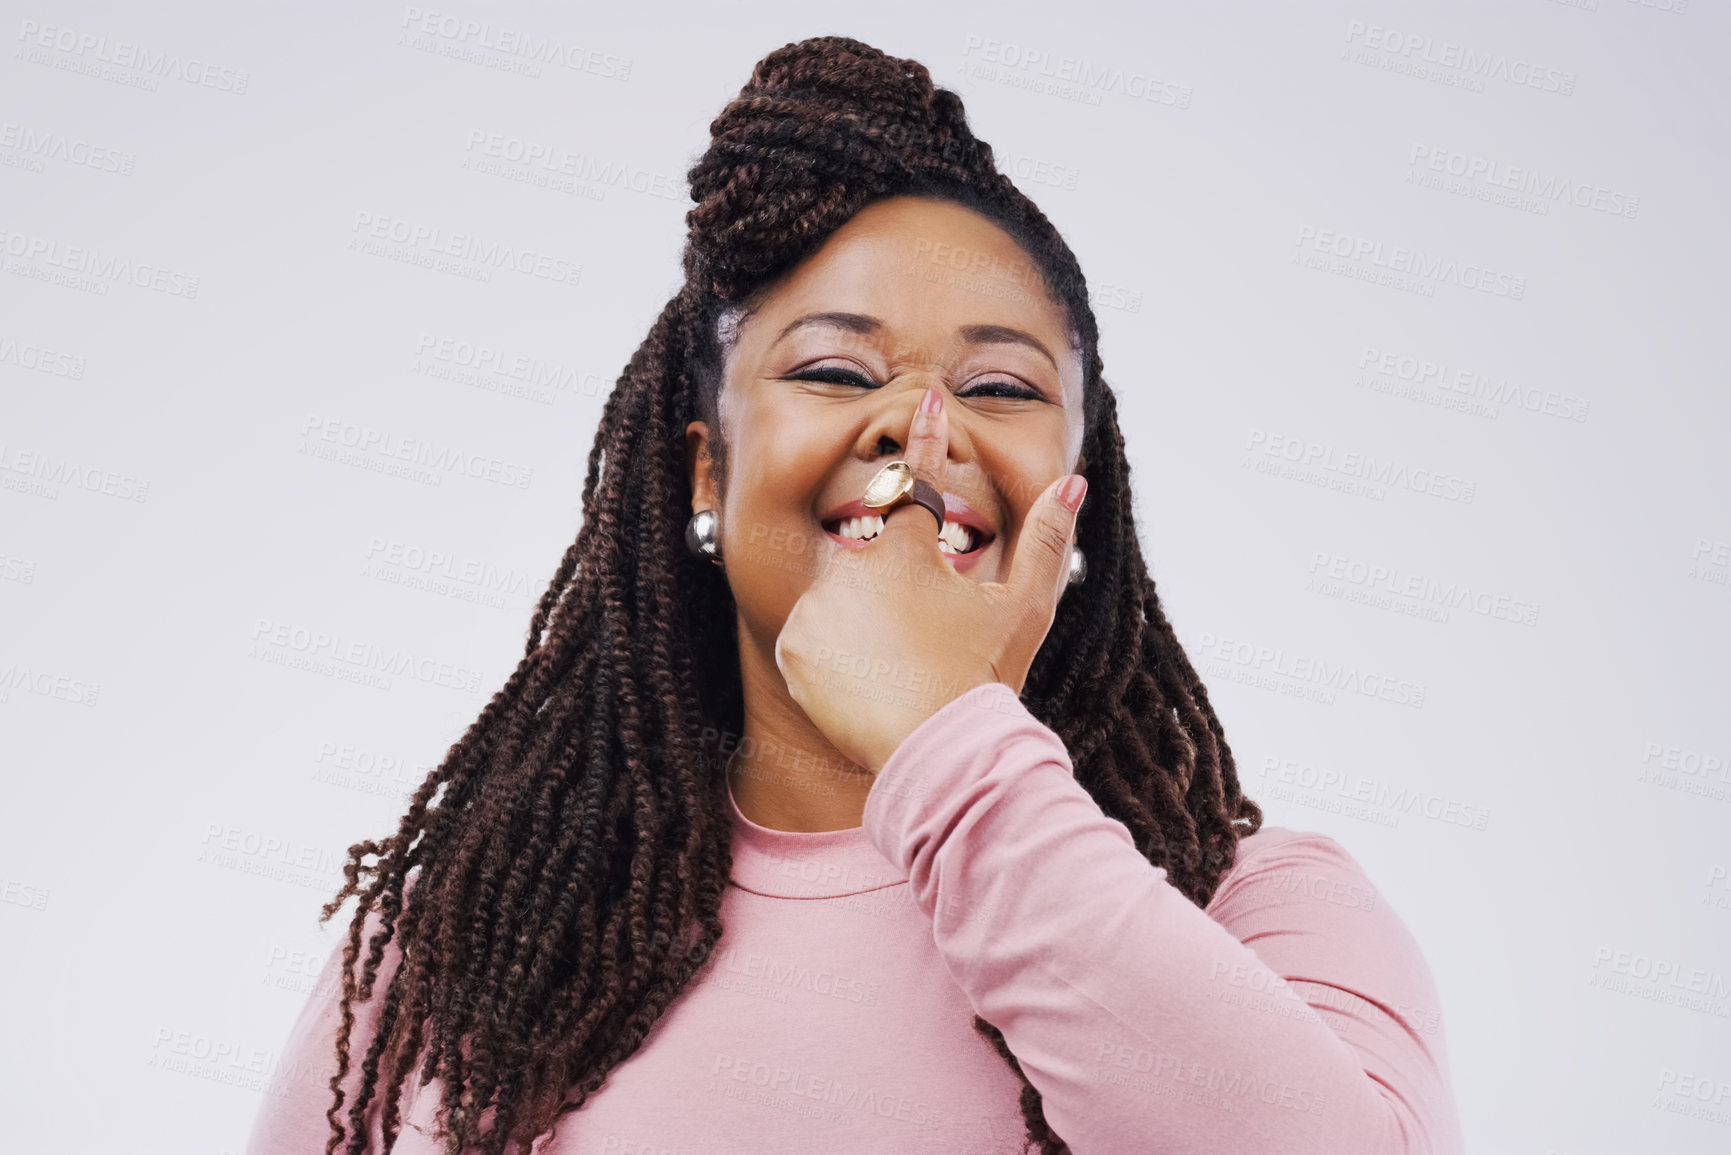 Buy stock photo Portrait, funny face and finger on nose with a black woman in studio on a gray background looking silly or goofy. Comedy, comic and nostril with a crazy young female person joking for fun or humor